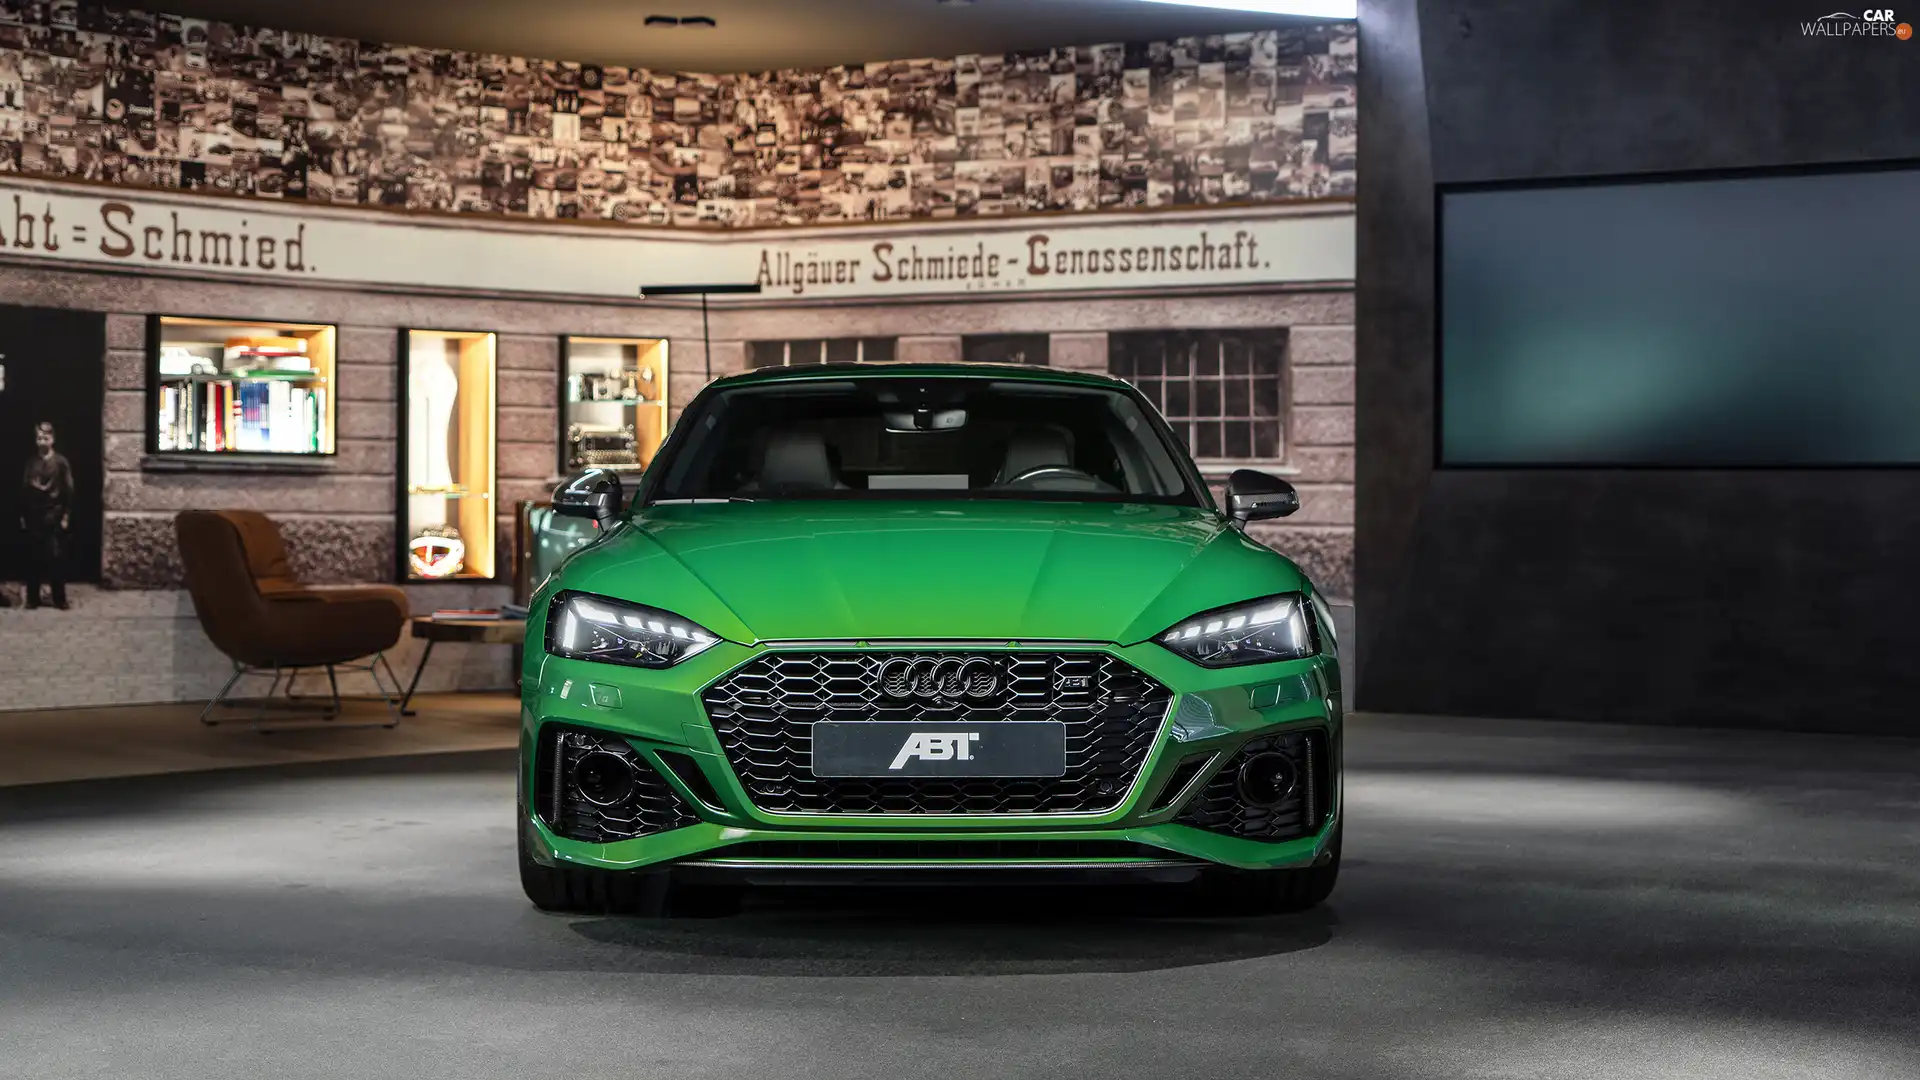 Audi RS5, coupe, green ones, ABT